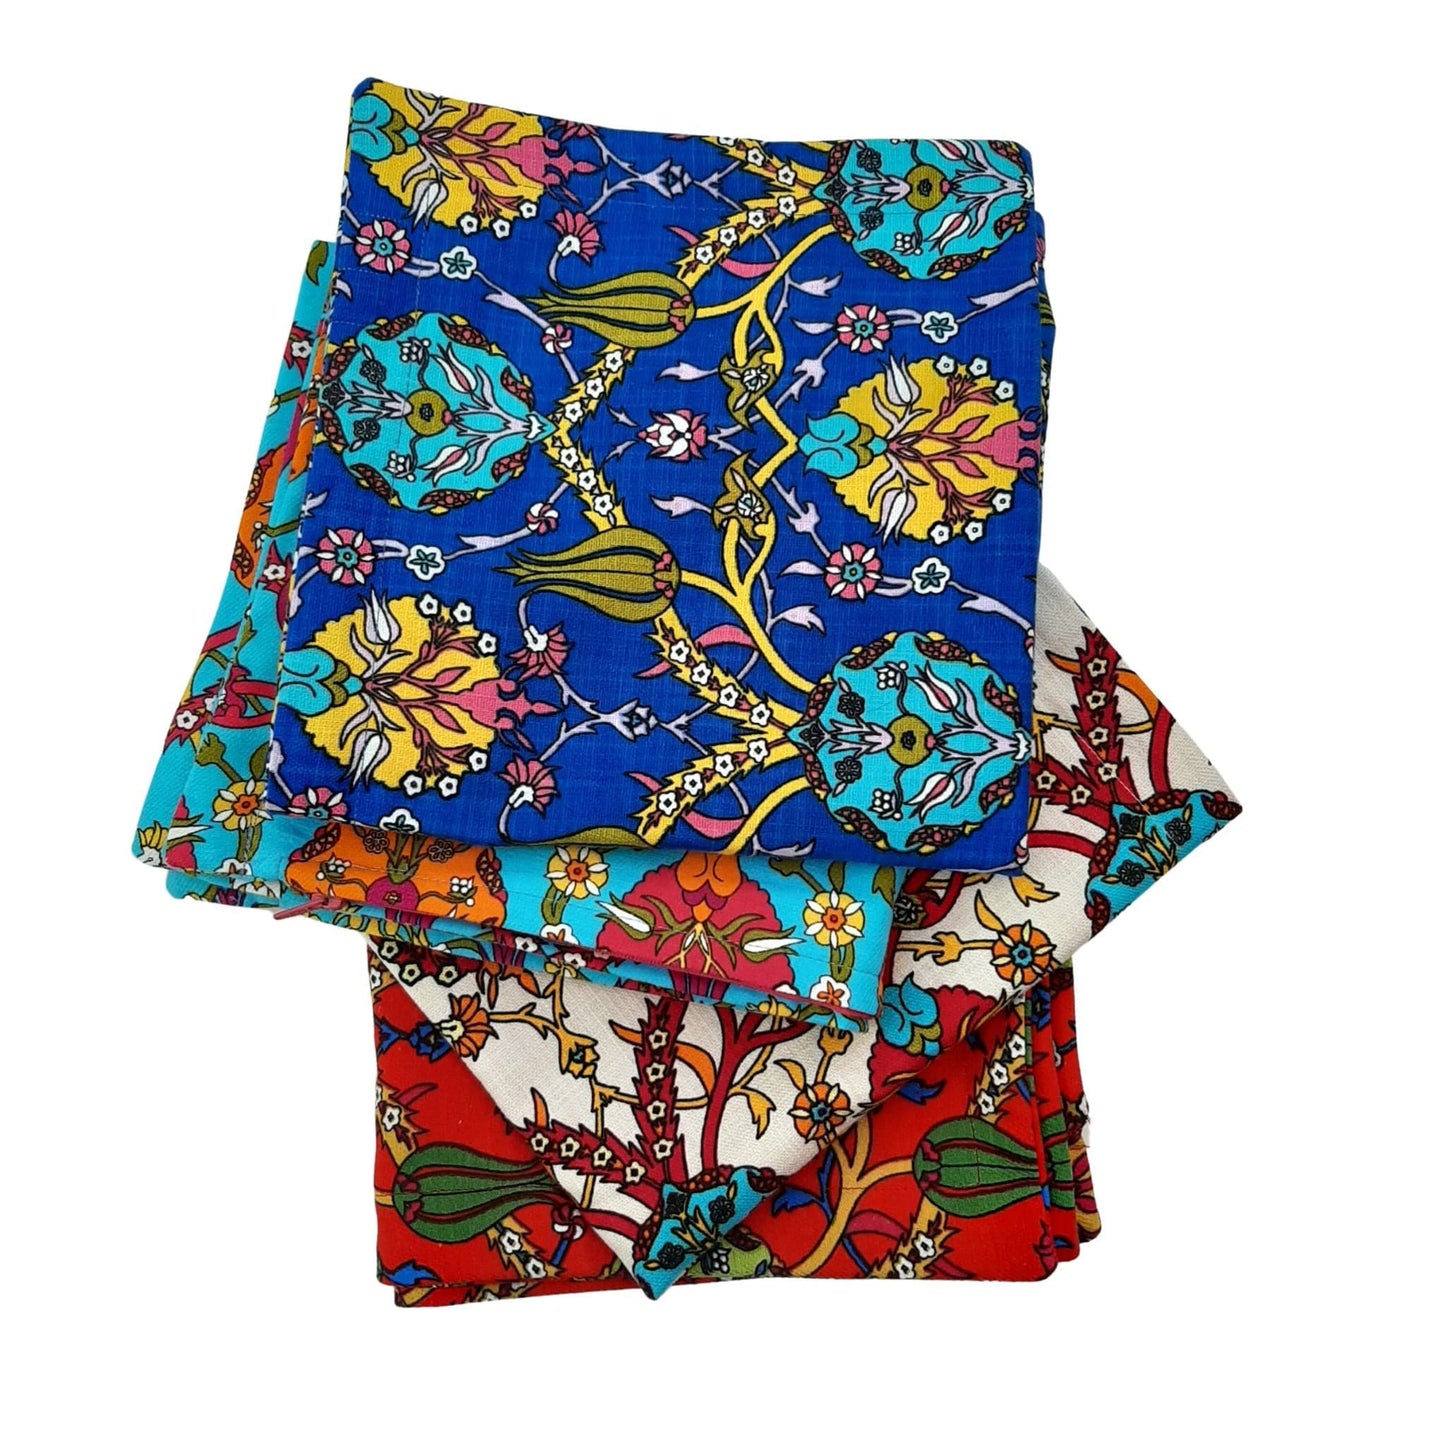 Turkish cotton cushion cover sets, azure blue, turquoise, red and soft white colours, tile inspired floral motifs